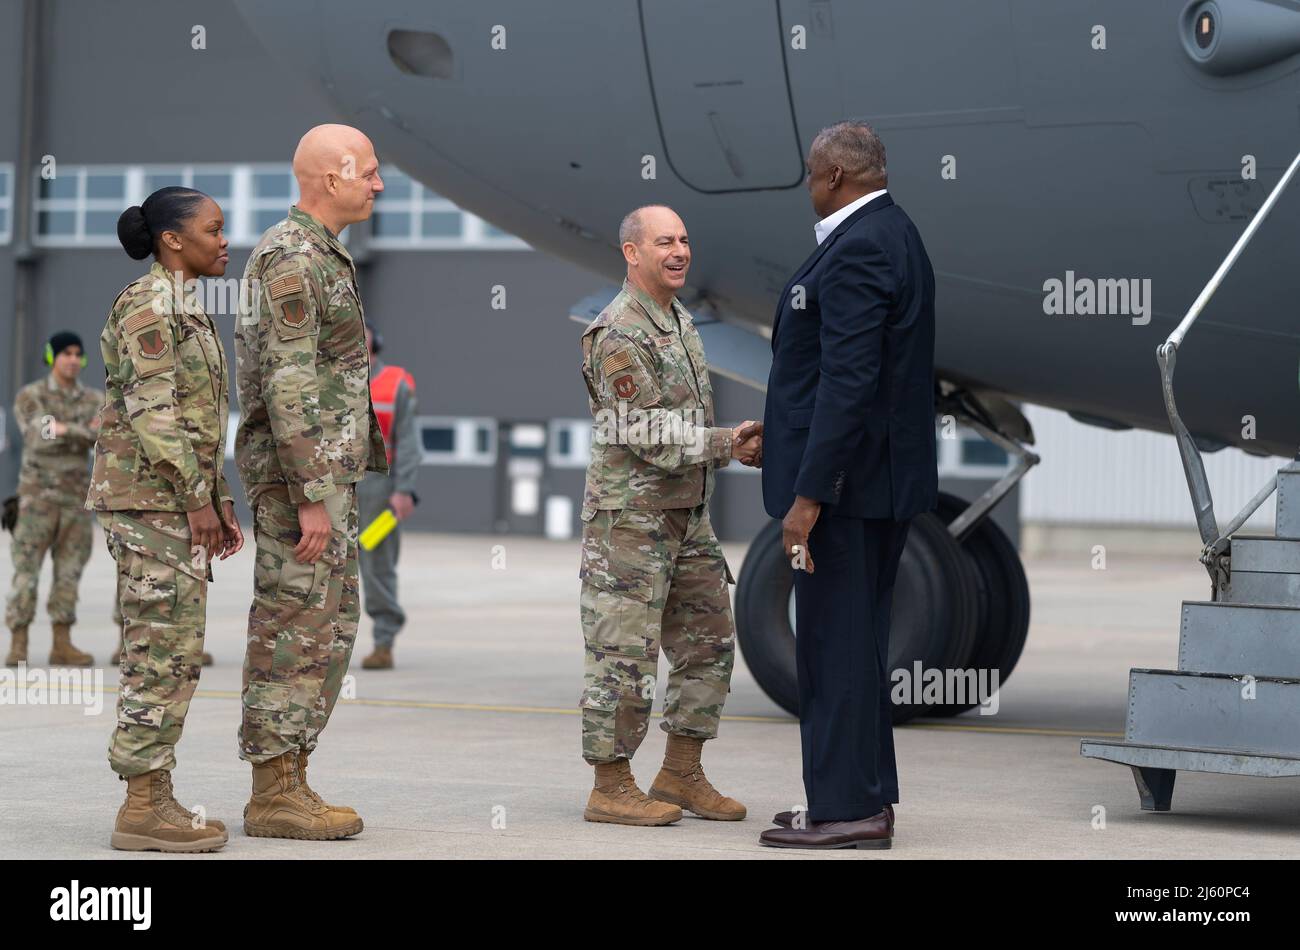 U.S. Secretary of Defense Lloyd Austin III (right) is greeted by (right to left) U.S. Air Force Gen. Jeffrey L. Harrigian, U.S. Air Forces in Europe – Air Forces Africa commander, Brig. Gen. Joshua Olson, 86th Airlift Wing commander and 86 AW Command Chief Master Sgt. Charmaine Kelley, at Ramstein Air Base, Germany, April 25, 2022. Secretary Austin invited Ministers of Defense and senior military officials to Ramstein this week to discuss the ongoing crisis in Ukraine and various issues facing U.S. allies and partners. (U.S. Air Force photo by Airman 1st Class Edgar Grimaldo) Stock Photo